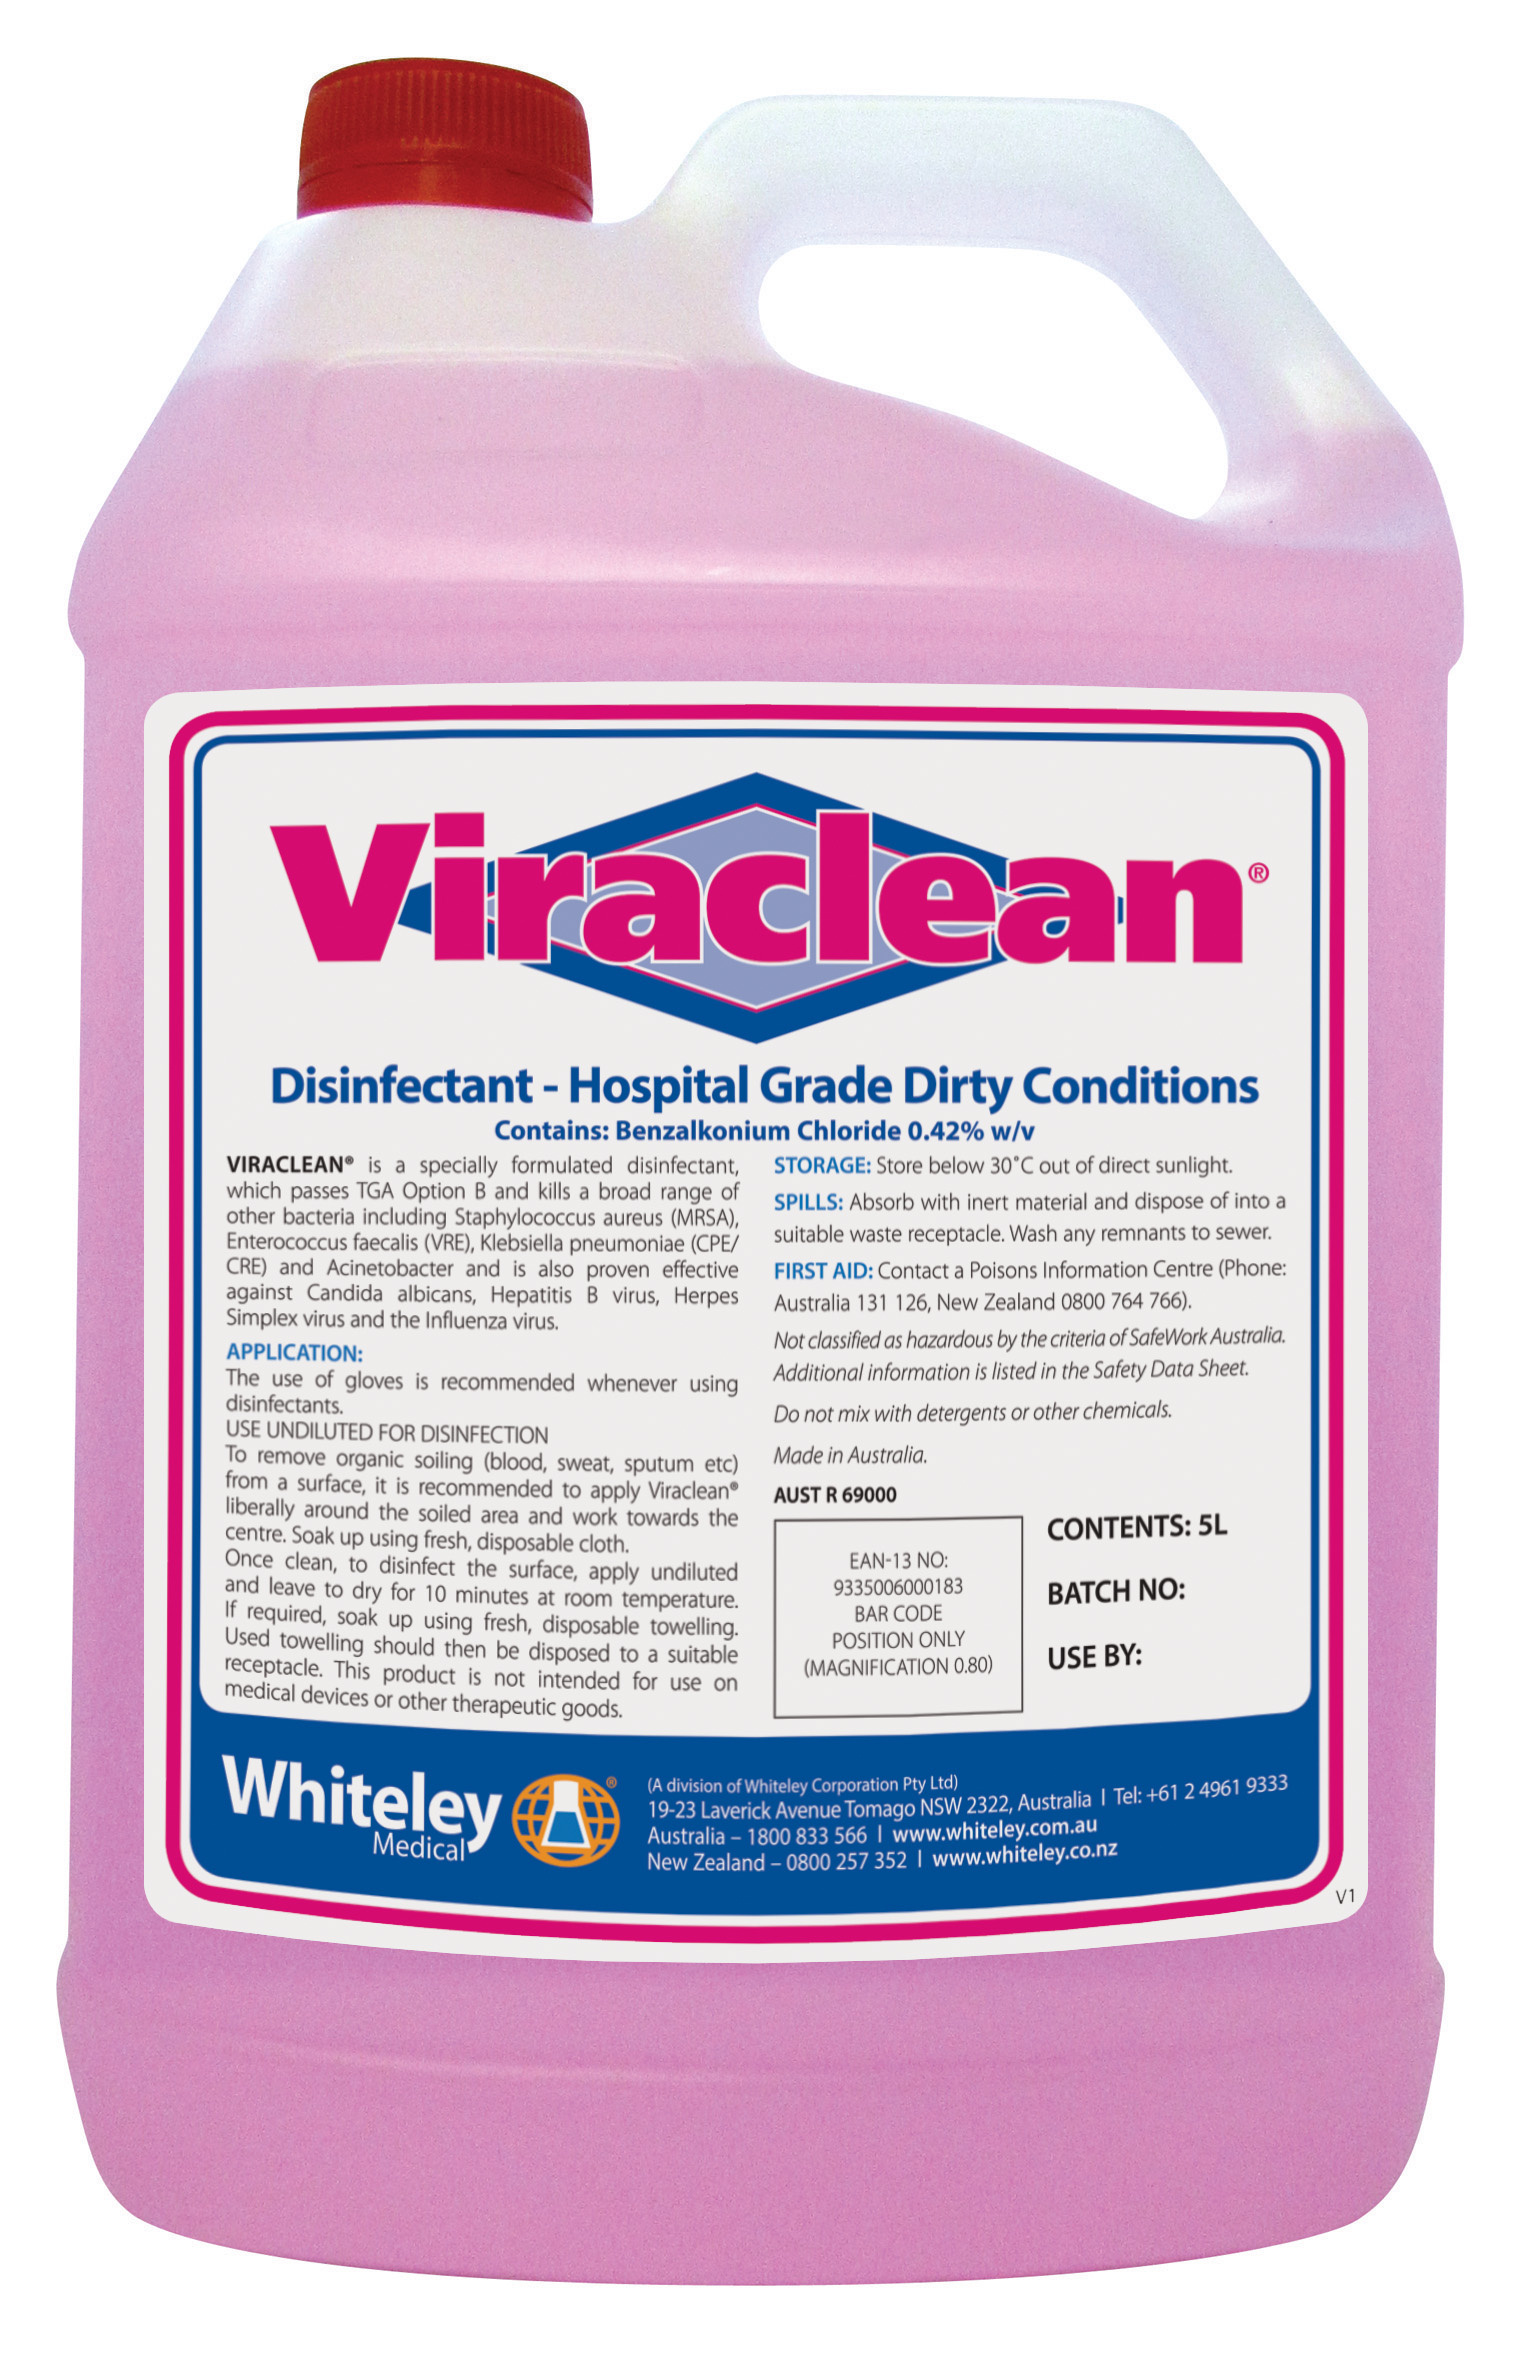 Whiteley Viraclean Hospital Grade Disinfectant 5 litre container